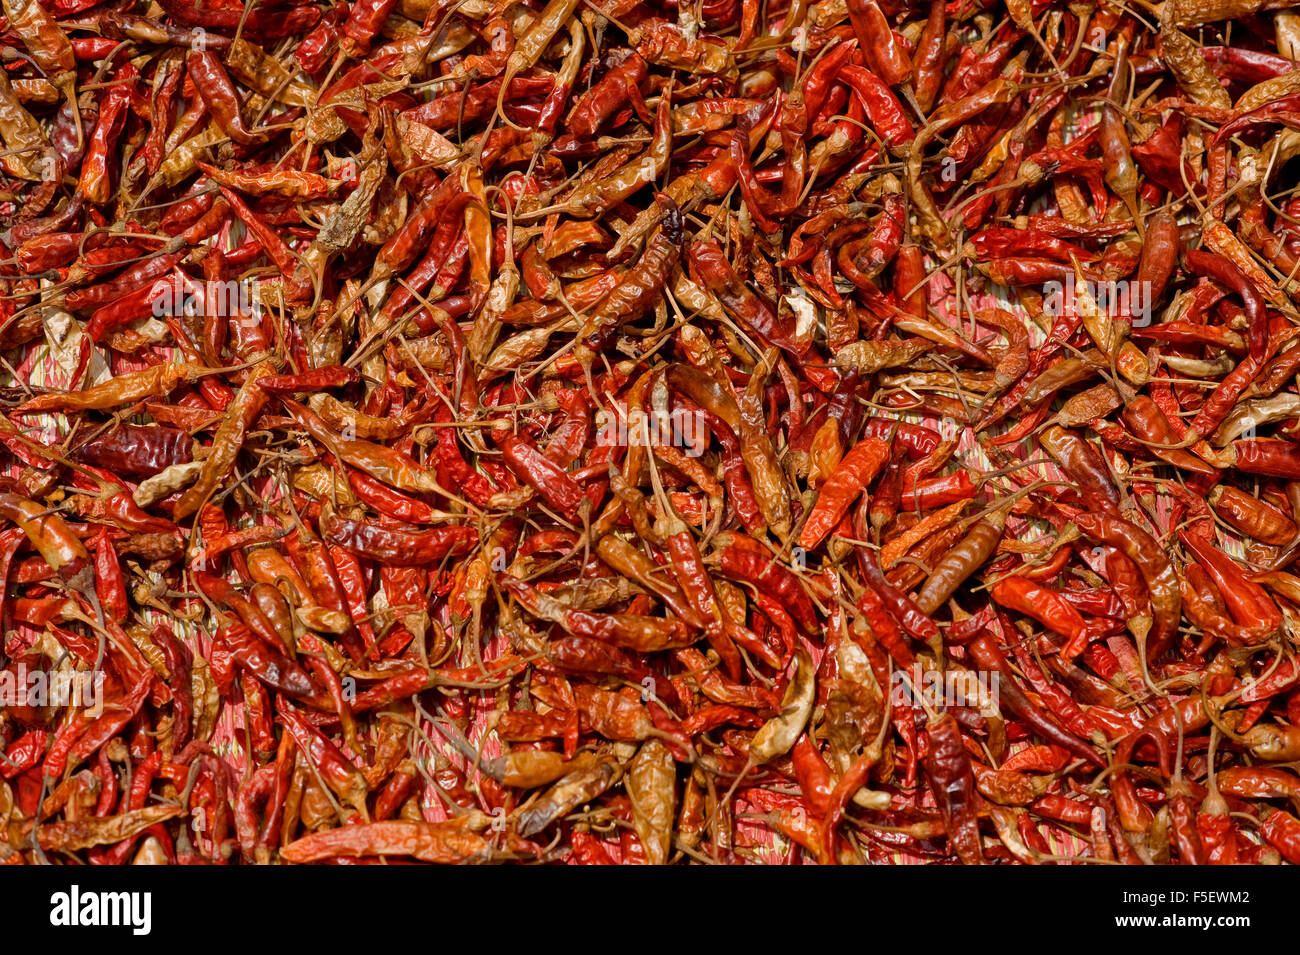 Pattern of sun dried chili peppers. Stock Photo